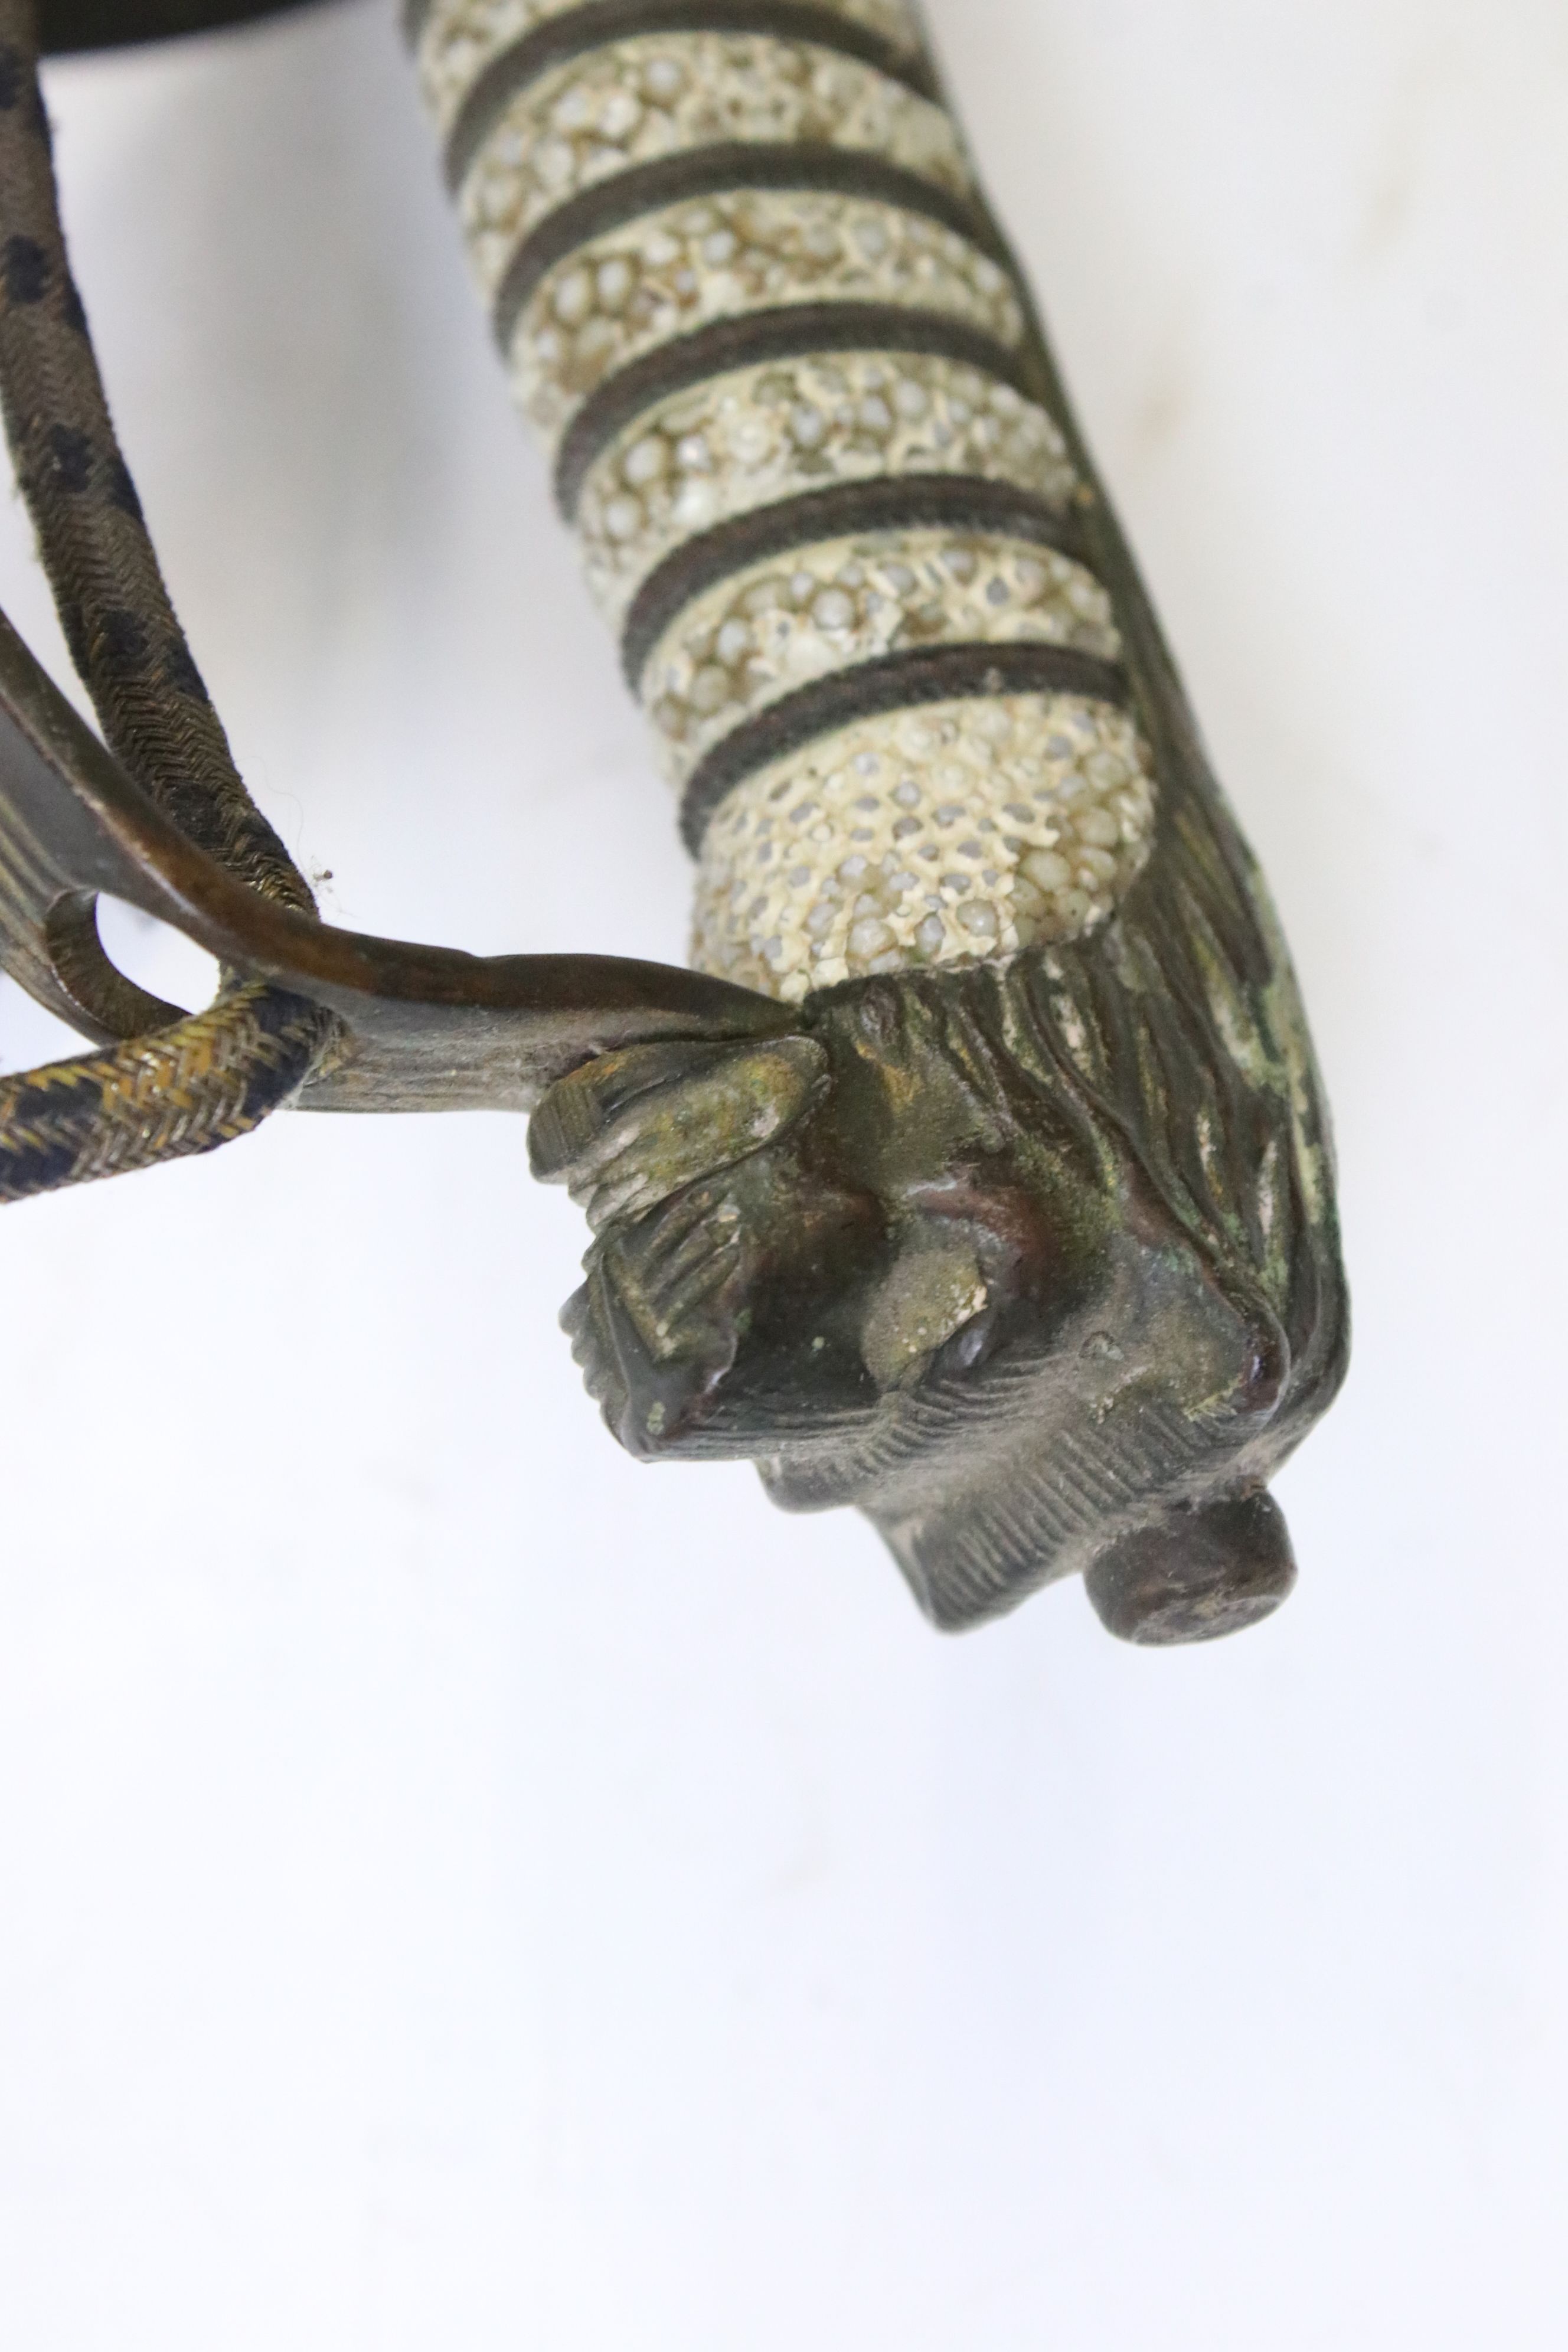 A Royal Navy officer's dress sword, lion head pommel, navy cypher with the kings crown, shagreen - Image 6 of 7